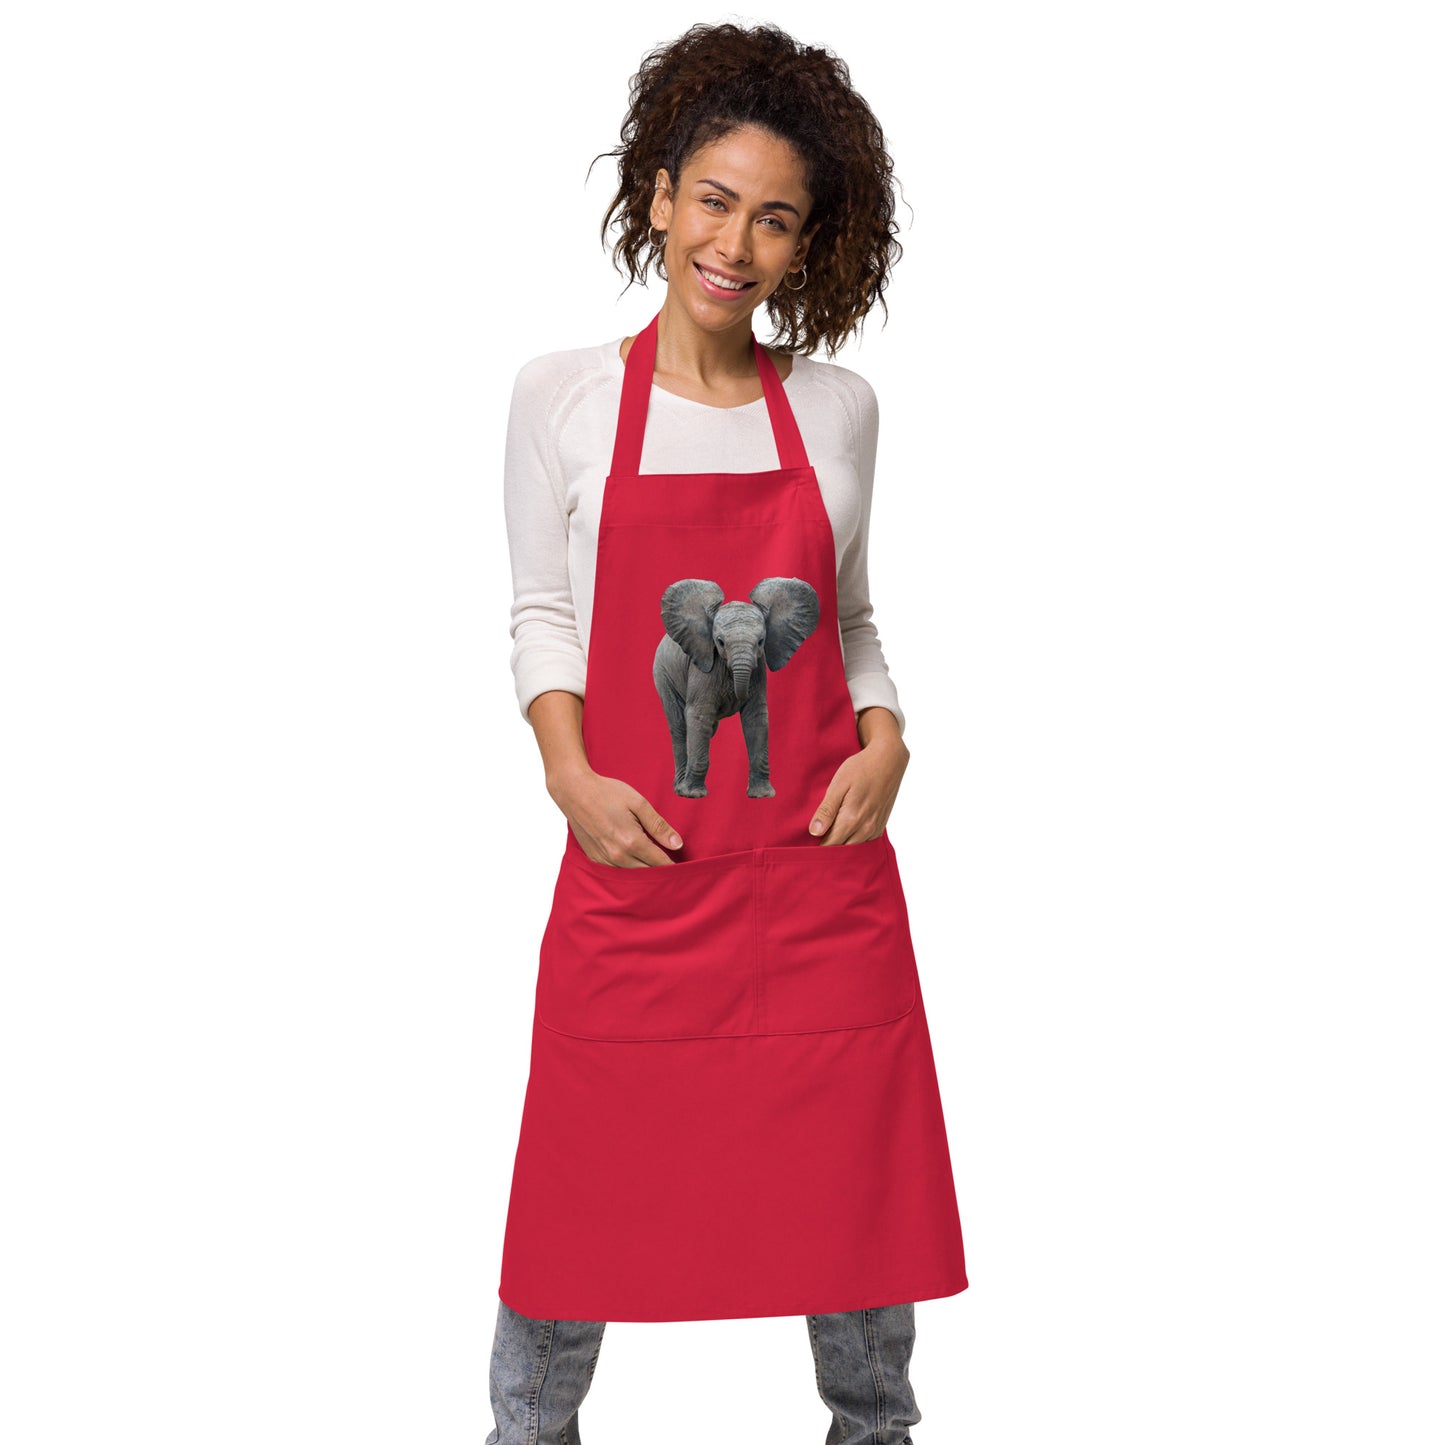 Organic Cotton Apron Printed with a Baby Elephant.